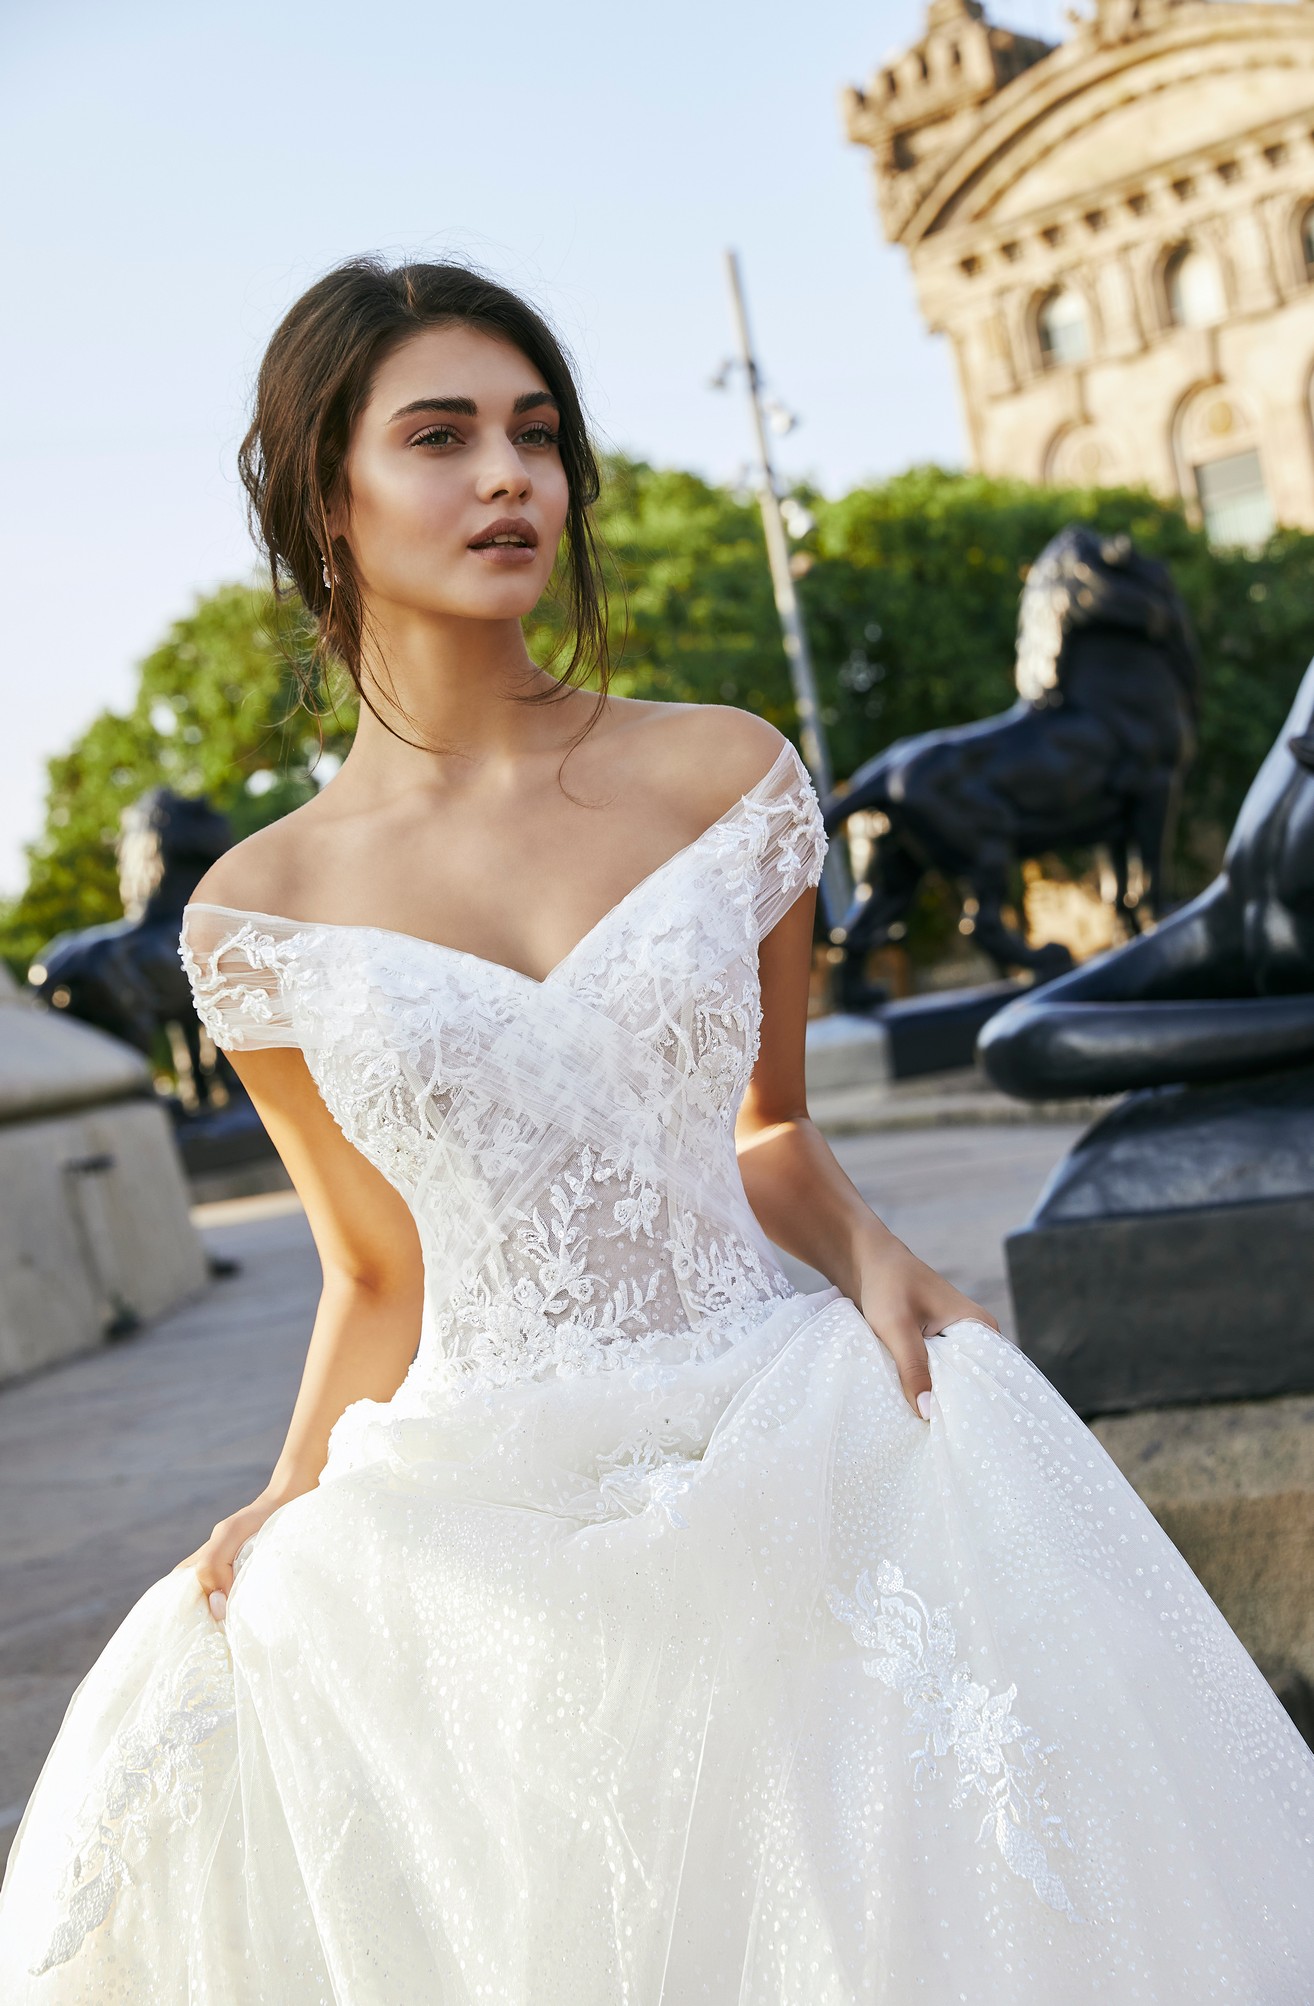 Close up of a model stood by lion statues in Ronald Joyce 69703, an off-the-shoulder A-line wedding dress with cap sleeves, an illusion bodice and v-neckline in tulle and lace applique bridal fabrics